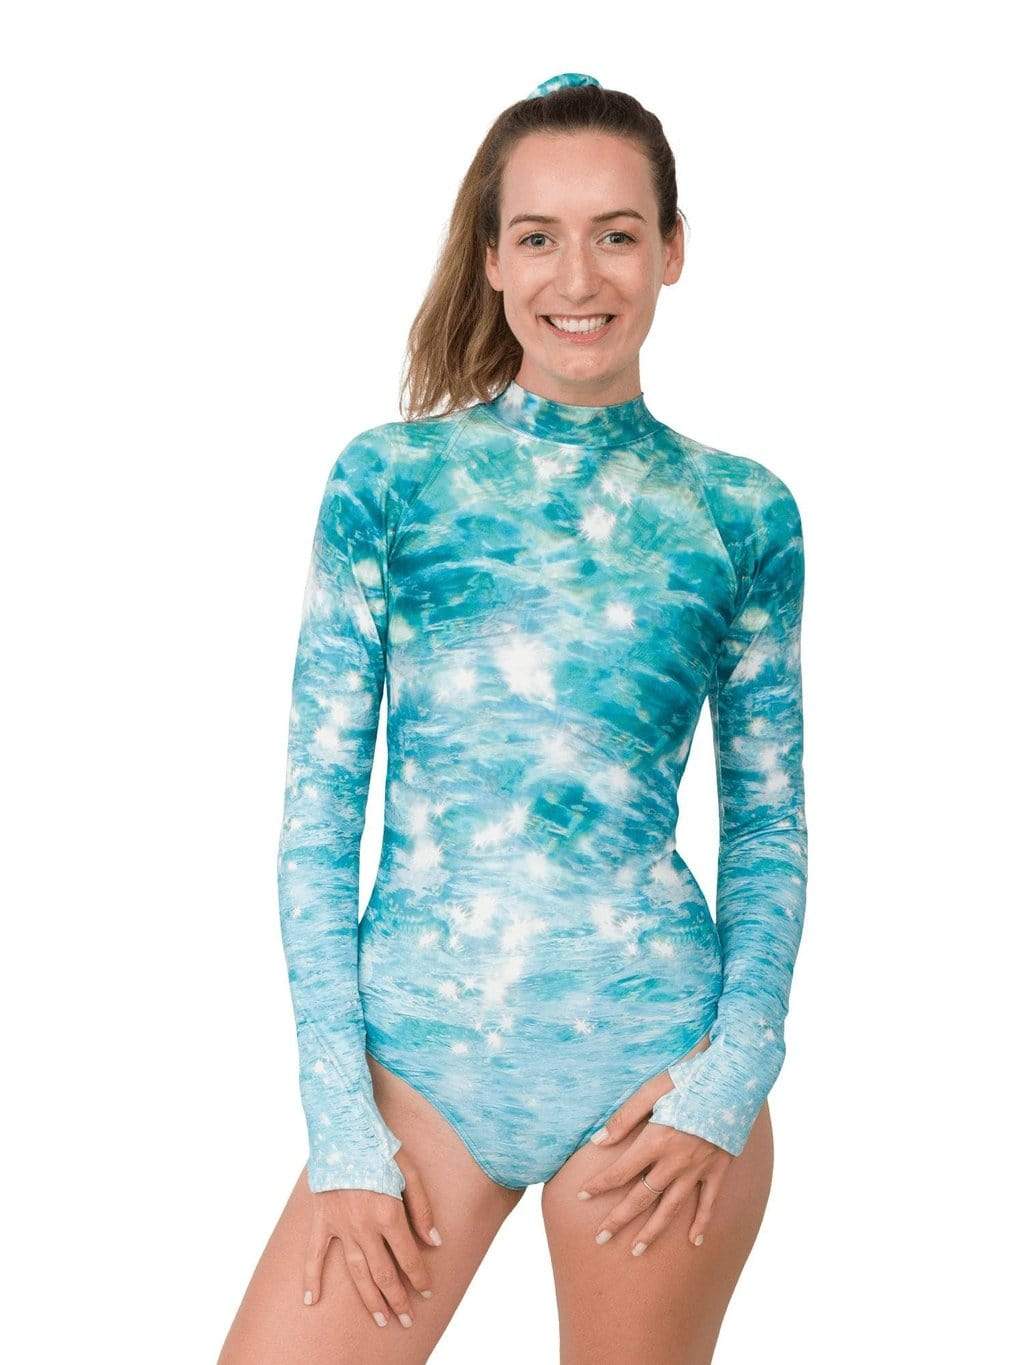 Model: Laura is our Chief Product Officer at Waterlust, a scuba diver, kiter and recreational yogi. She is 5’10, 147 lbs, 34B and is wearing a size S.